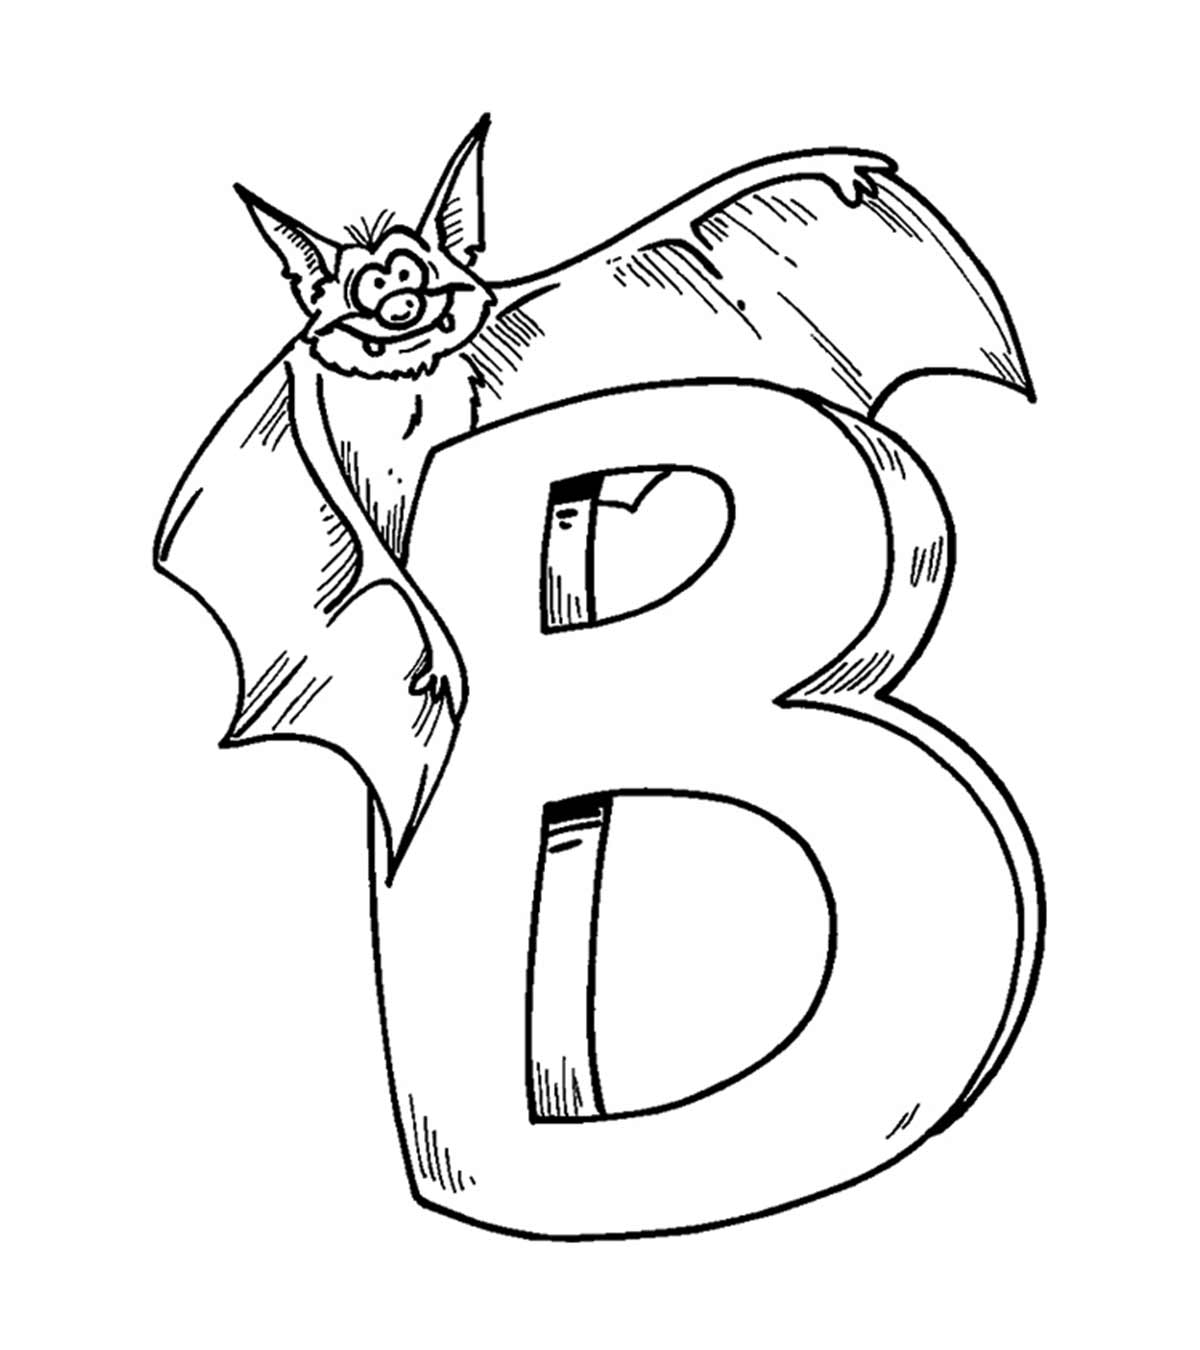 20 Best Bats Coloring Pages Your Toddler Will Love To Do